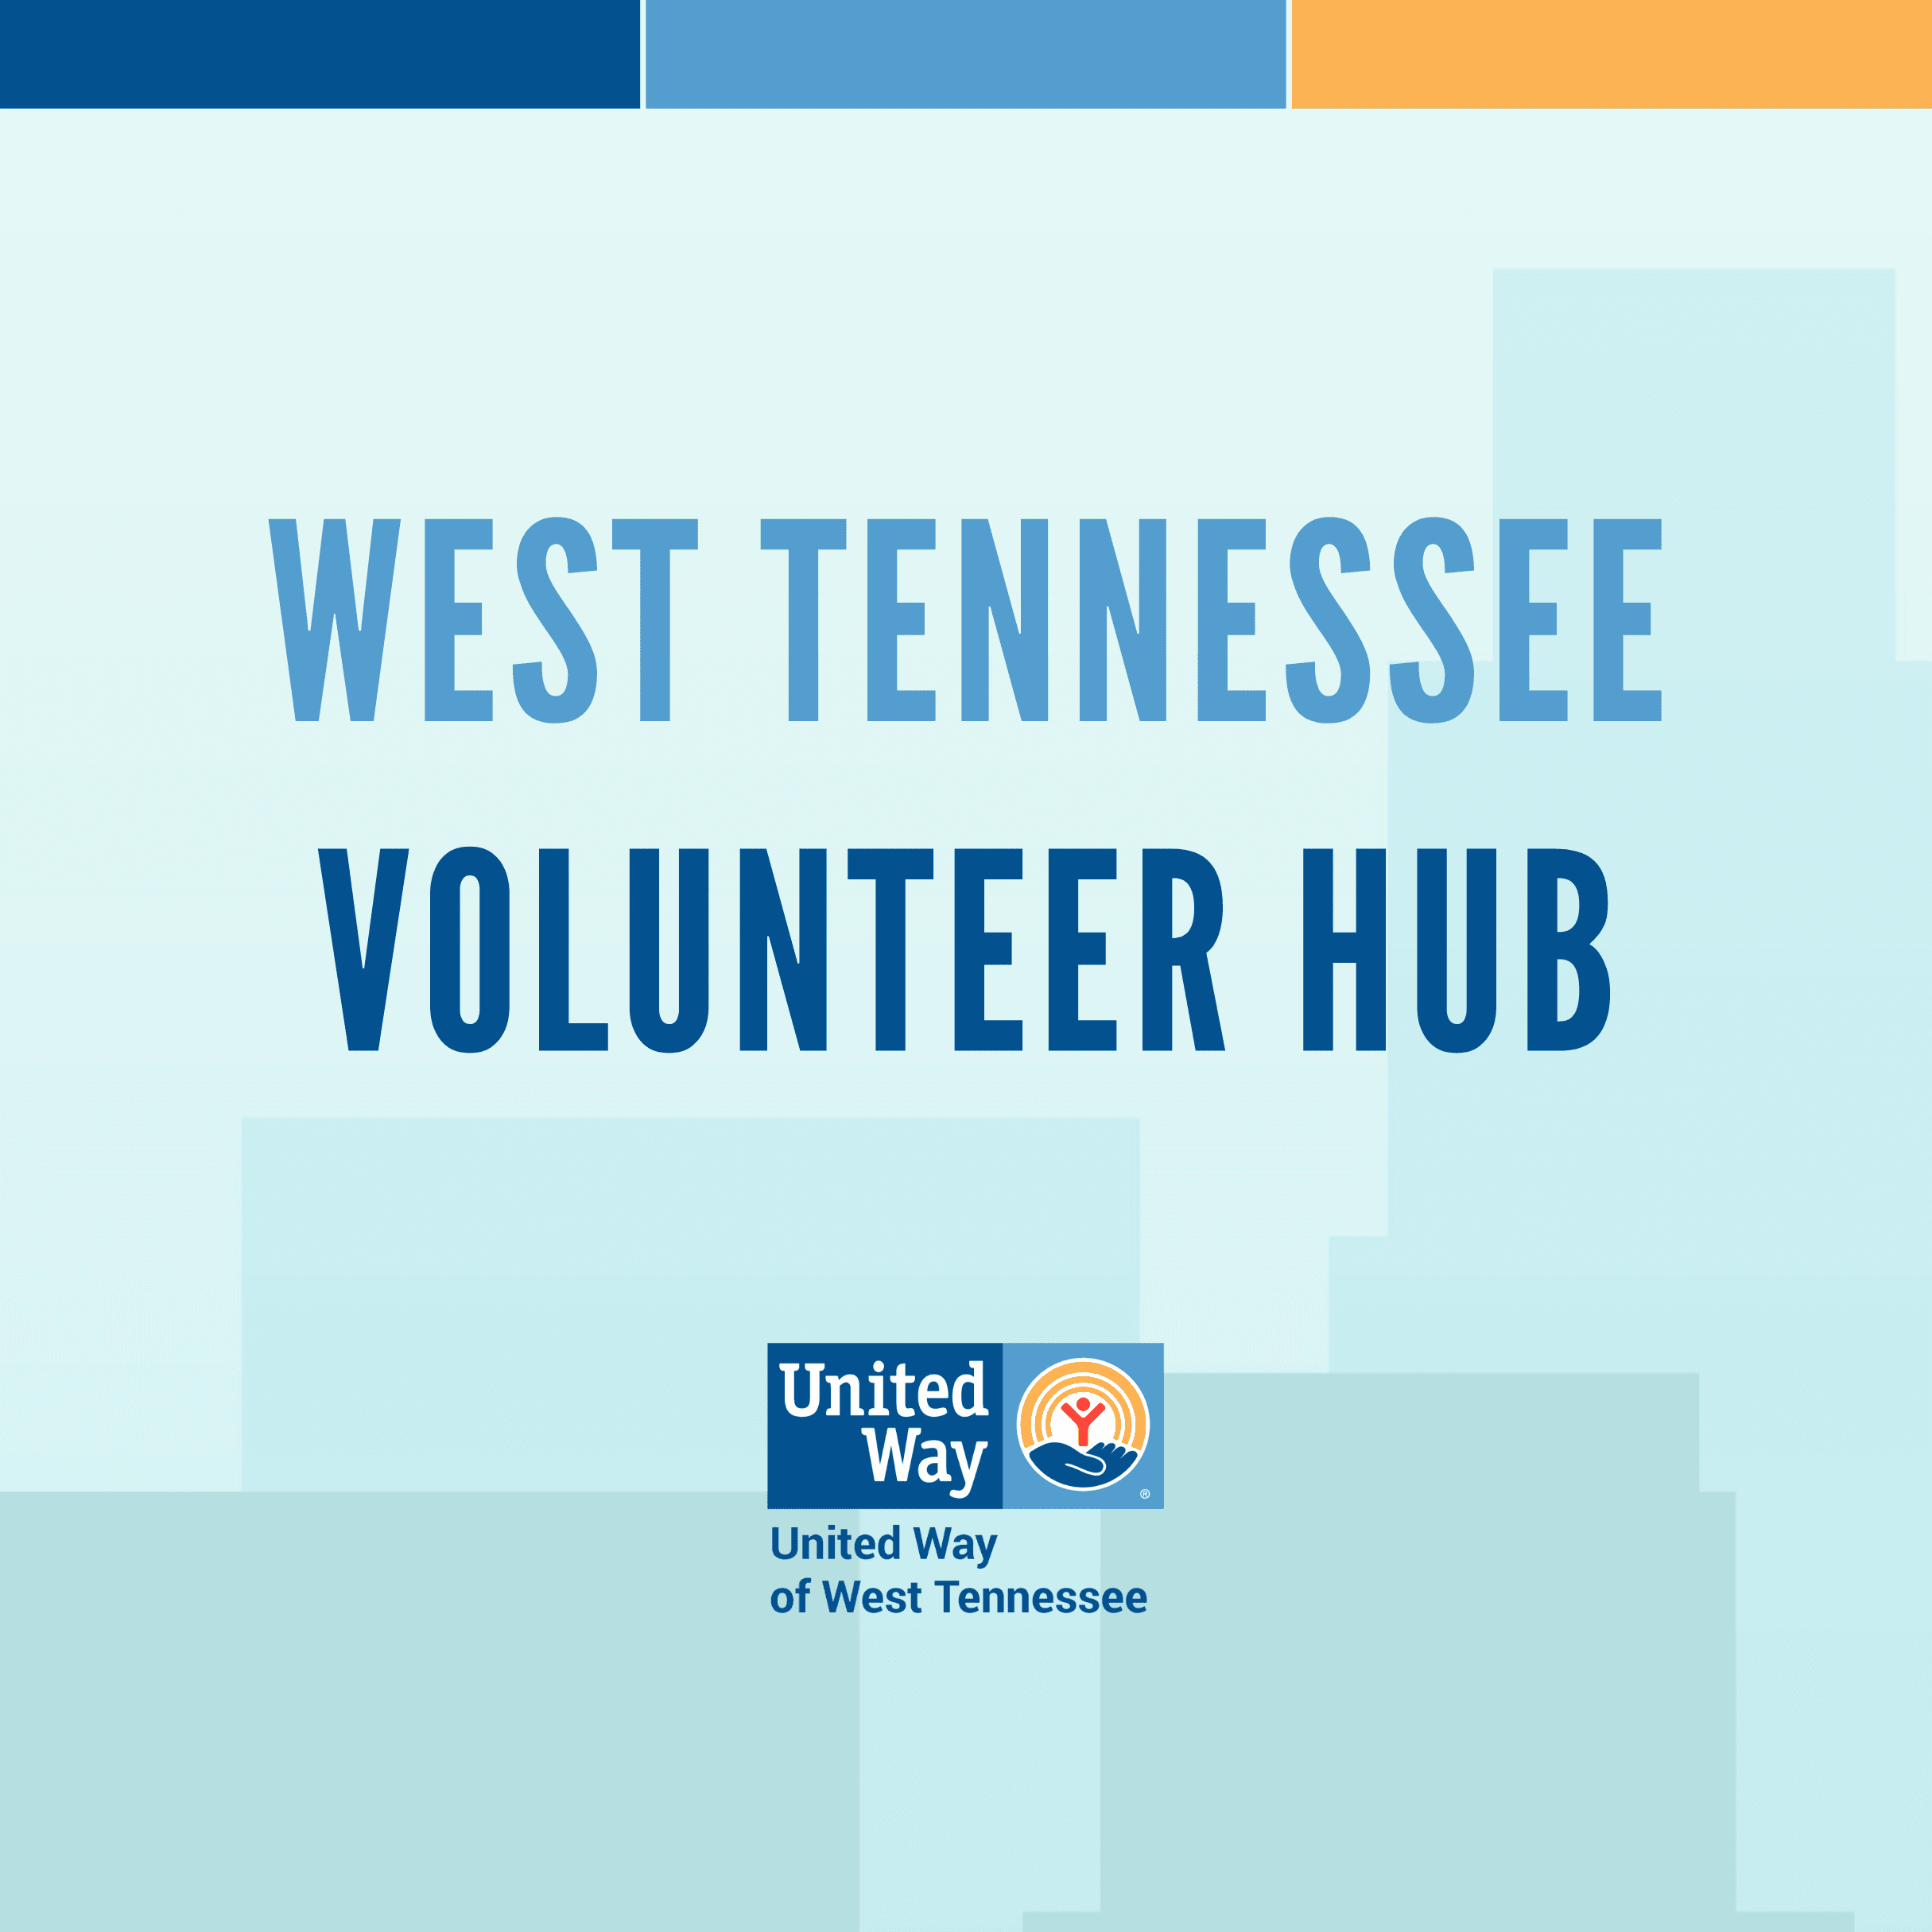 United Way of West Tennessee Launches West Tennessee Volunteer Hub